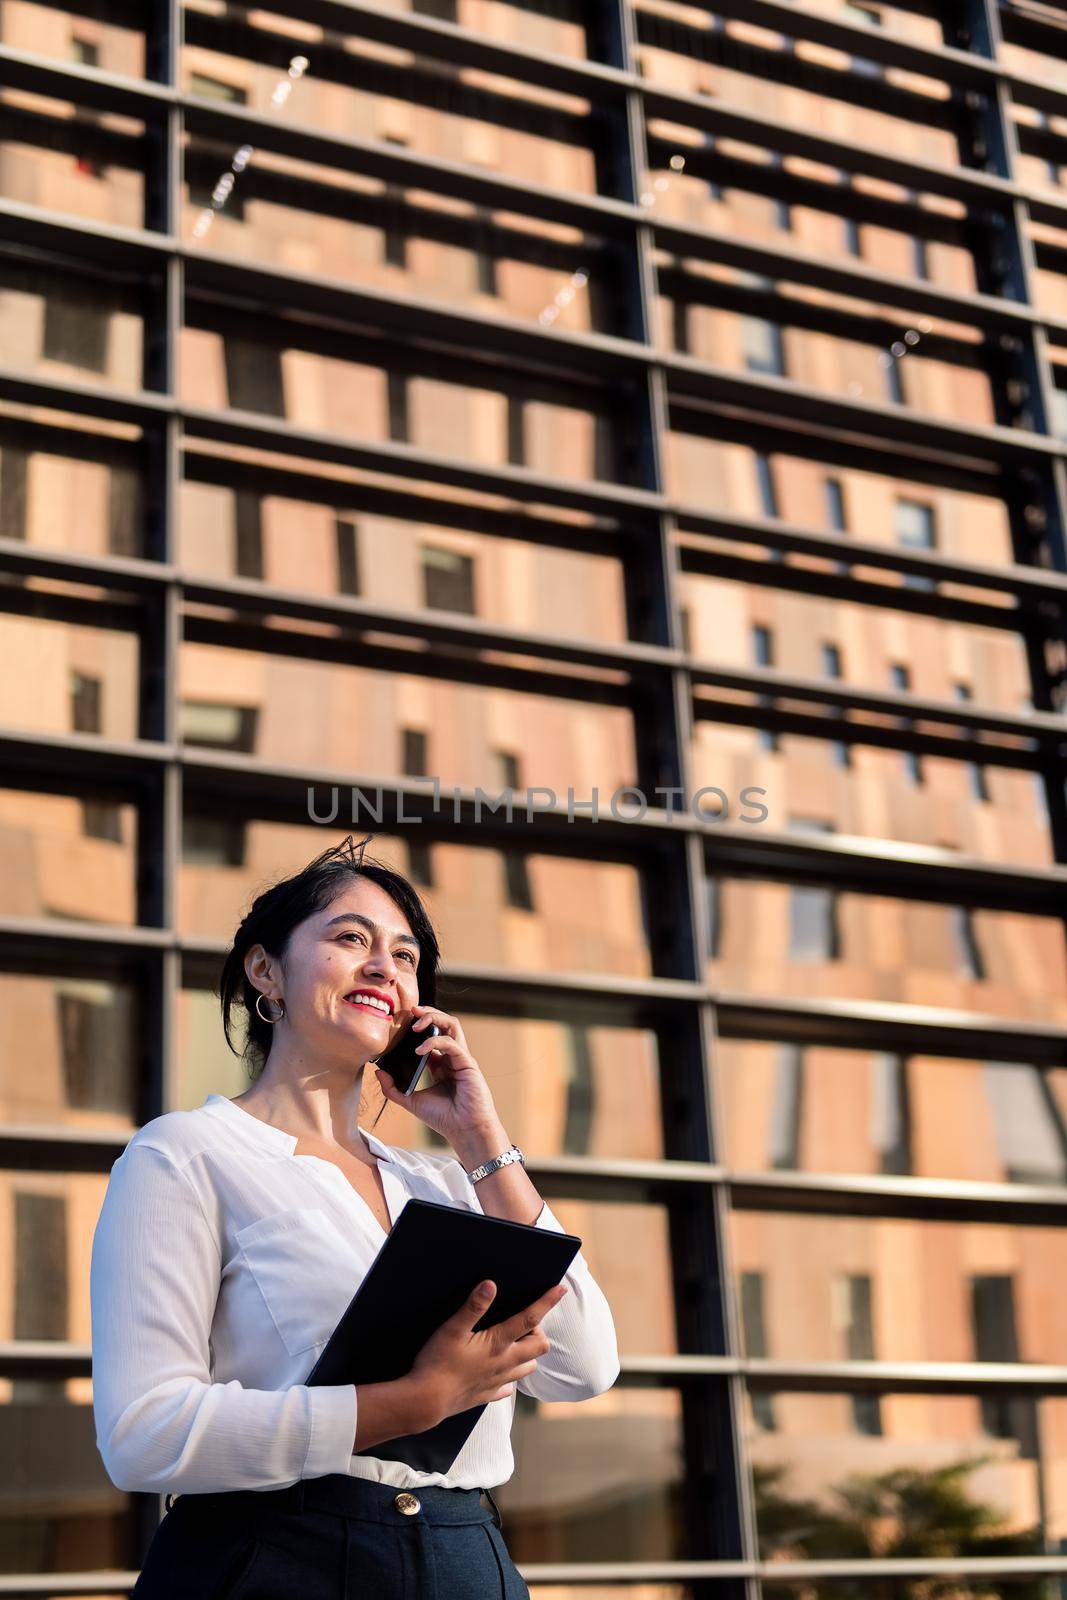 smiling businesswoman talking on the phone and using her tablet in front of an office building, concept of successful entrepreneur and urban lifestyle, copy space for text